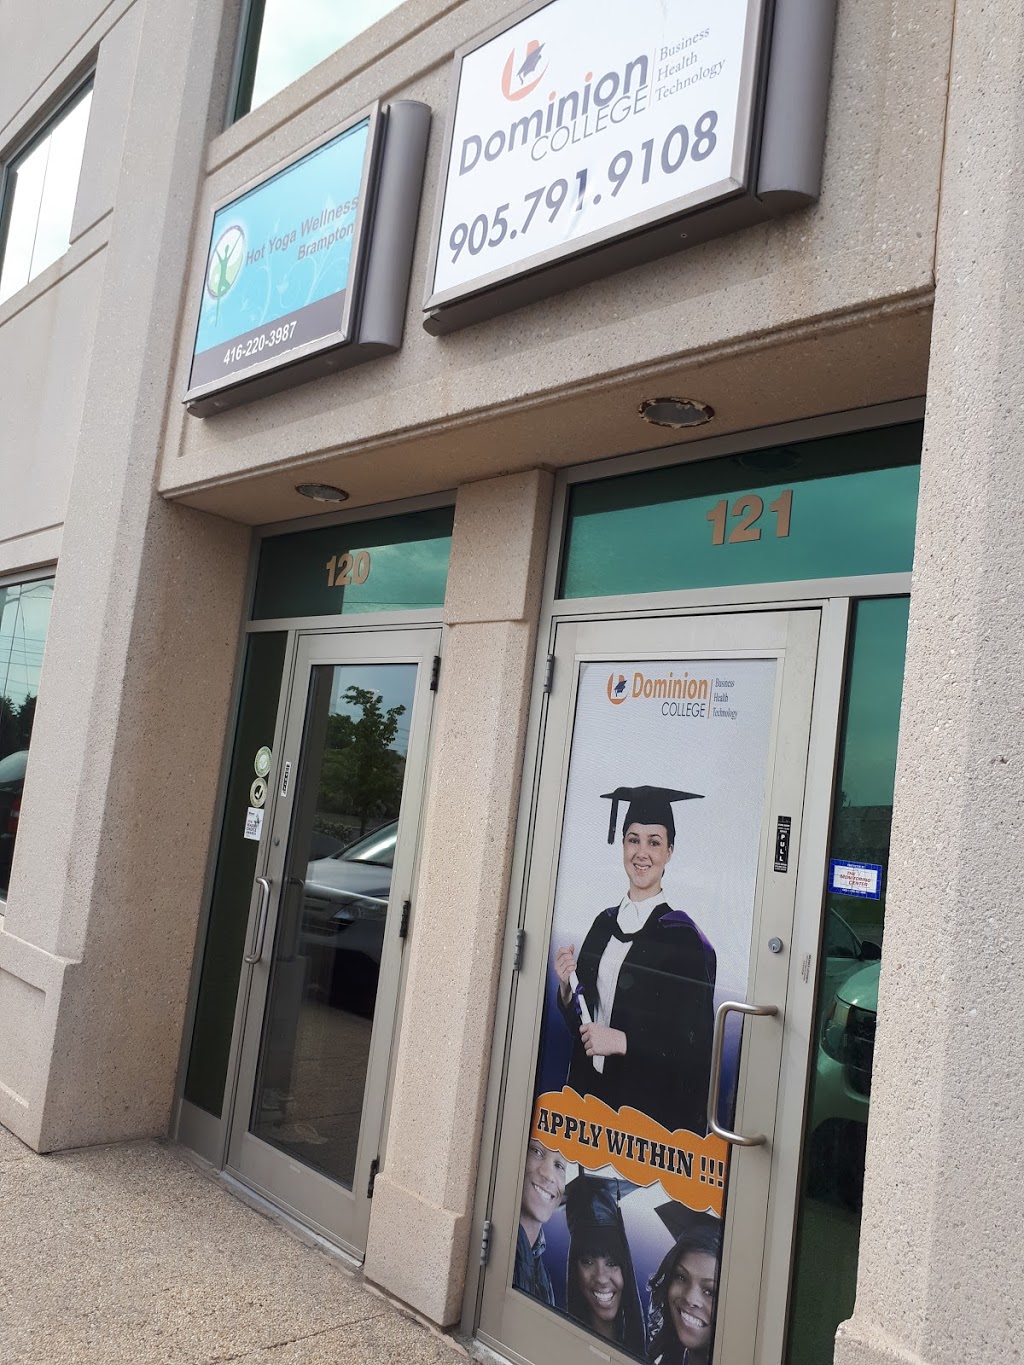 Dominion College of Business Health and Technolgy Inc | university | 2 Automatic Rd unit 121, Brampton, ON L6S 6K8, Canada | 9057919108 OR +1 905-791-9108